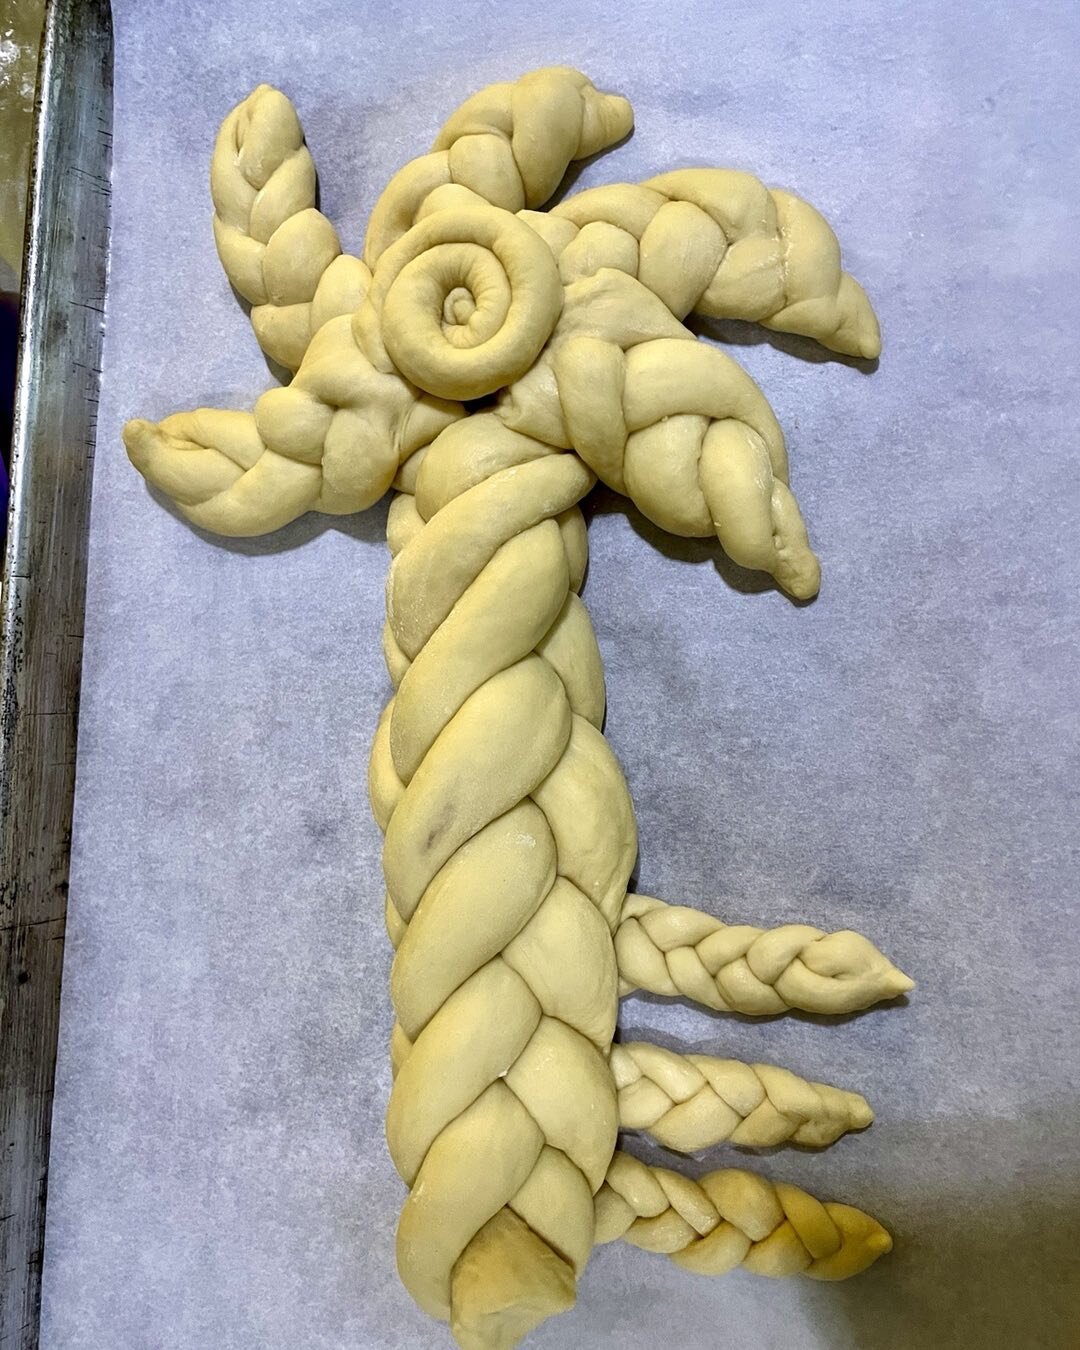 A Shlissel challah for our first post-Passover Shabbat at Beit T&rsquo;Shuvah. Thank you Cheryl from Nomad Bakery for sharing your creativity and techniques.